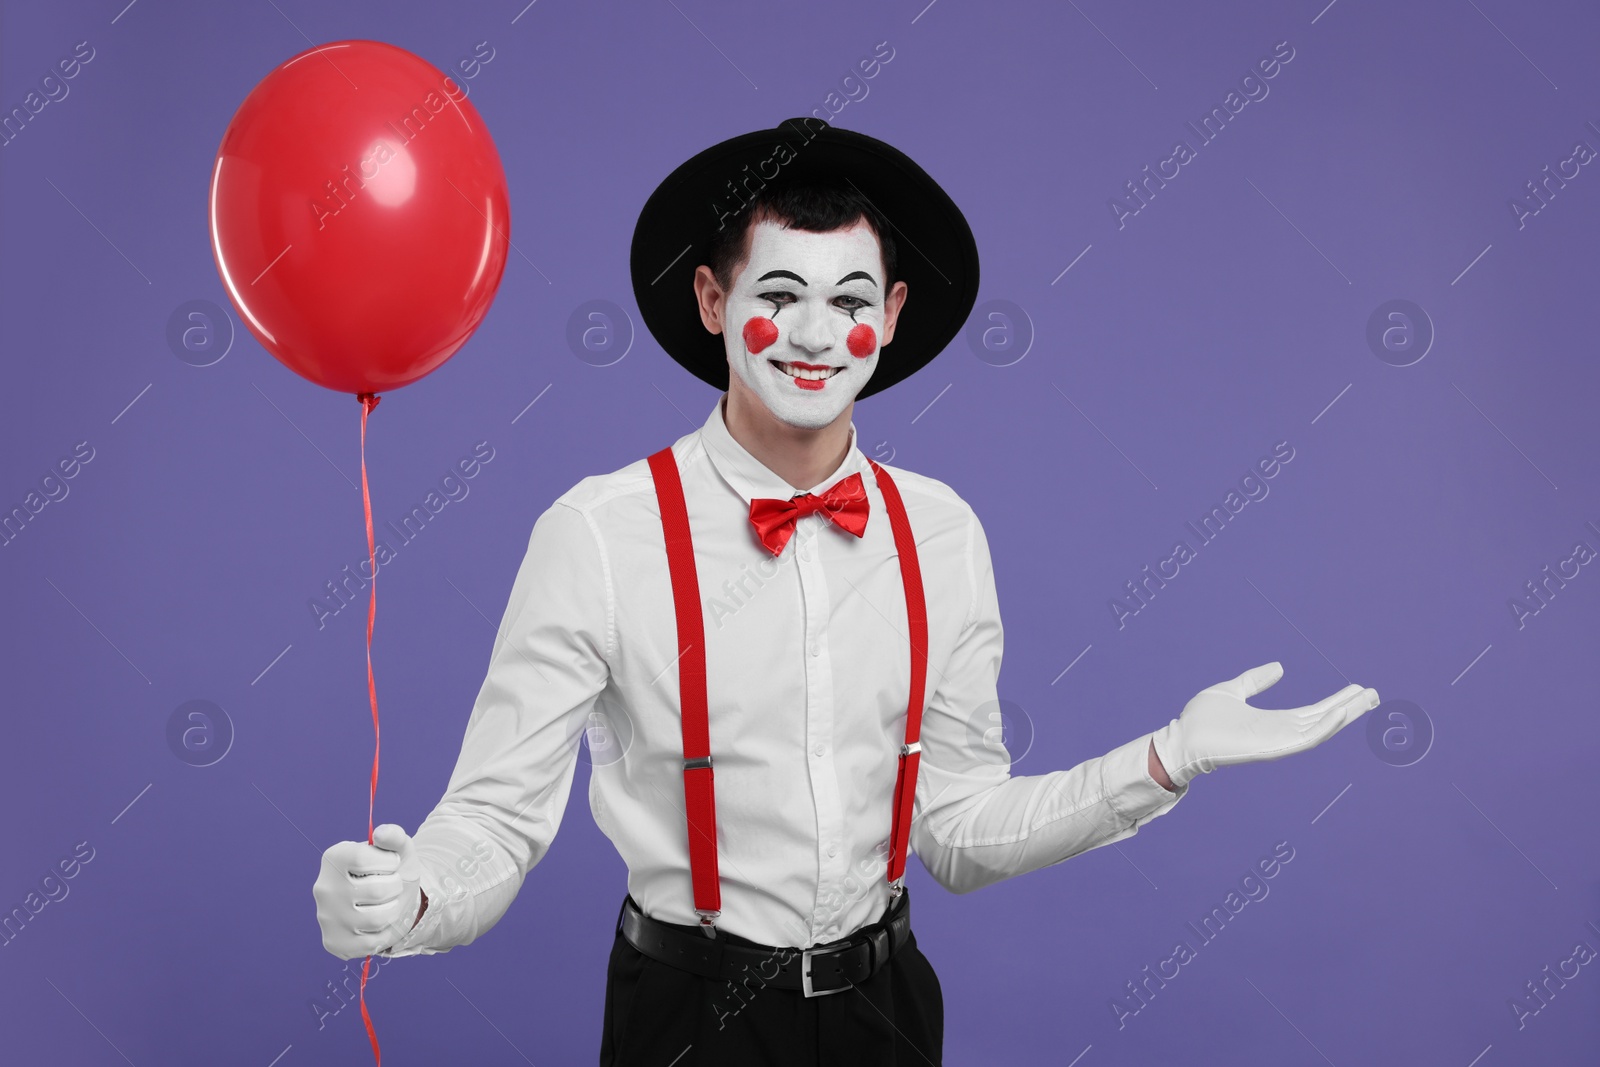 Photo of Funny mime artist with red balloon on purple background